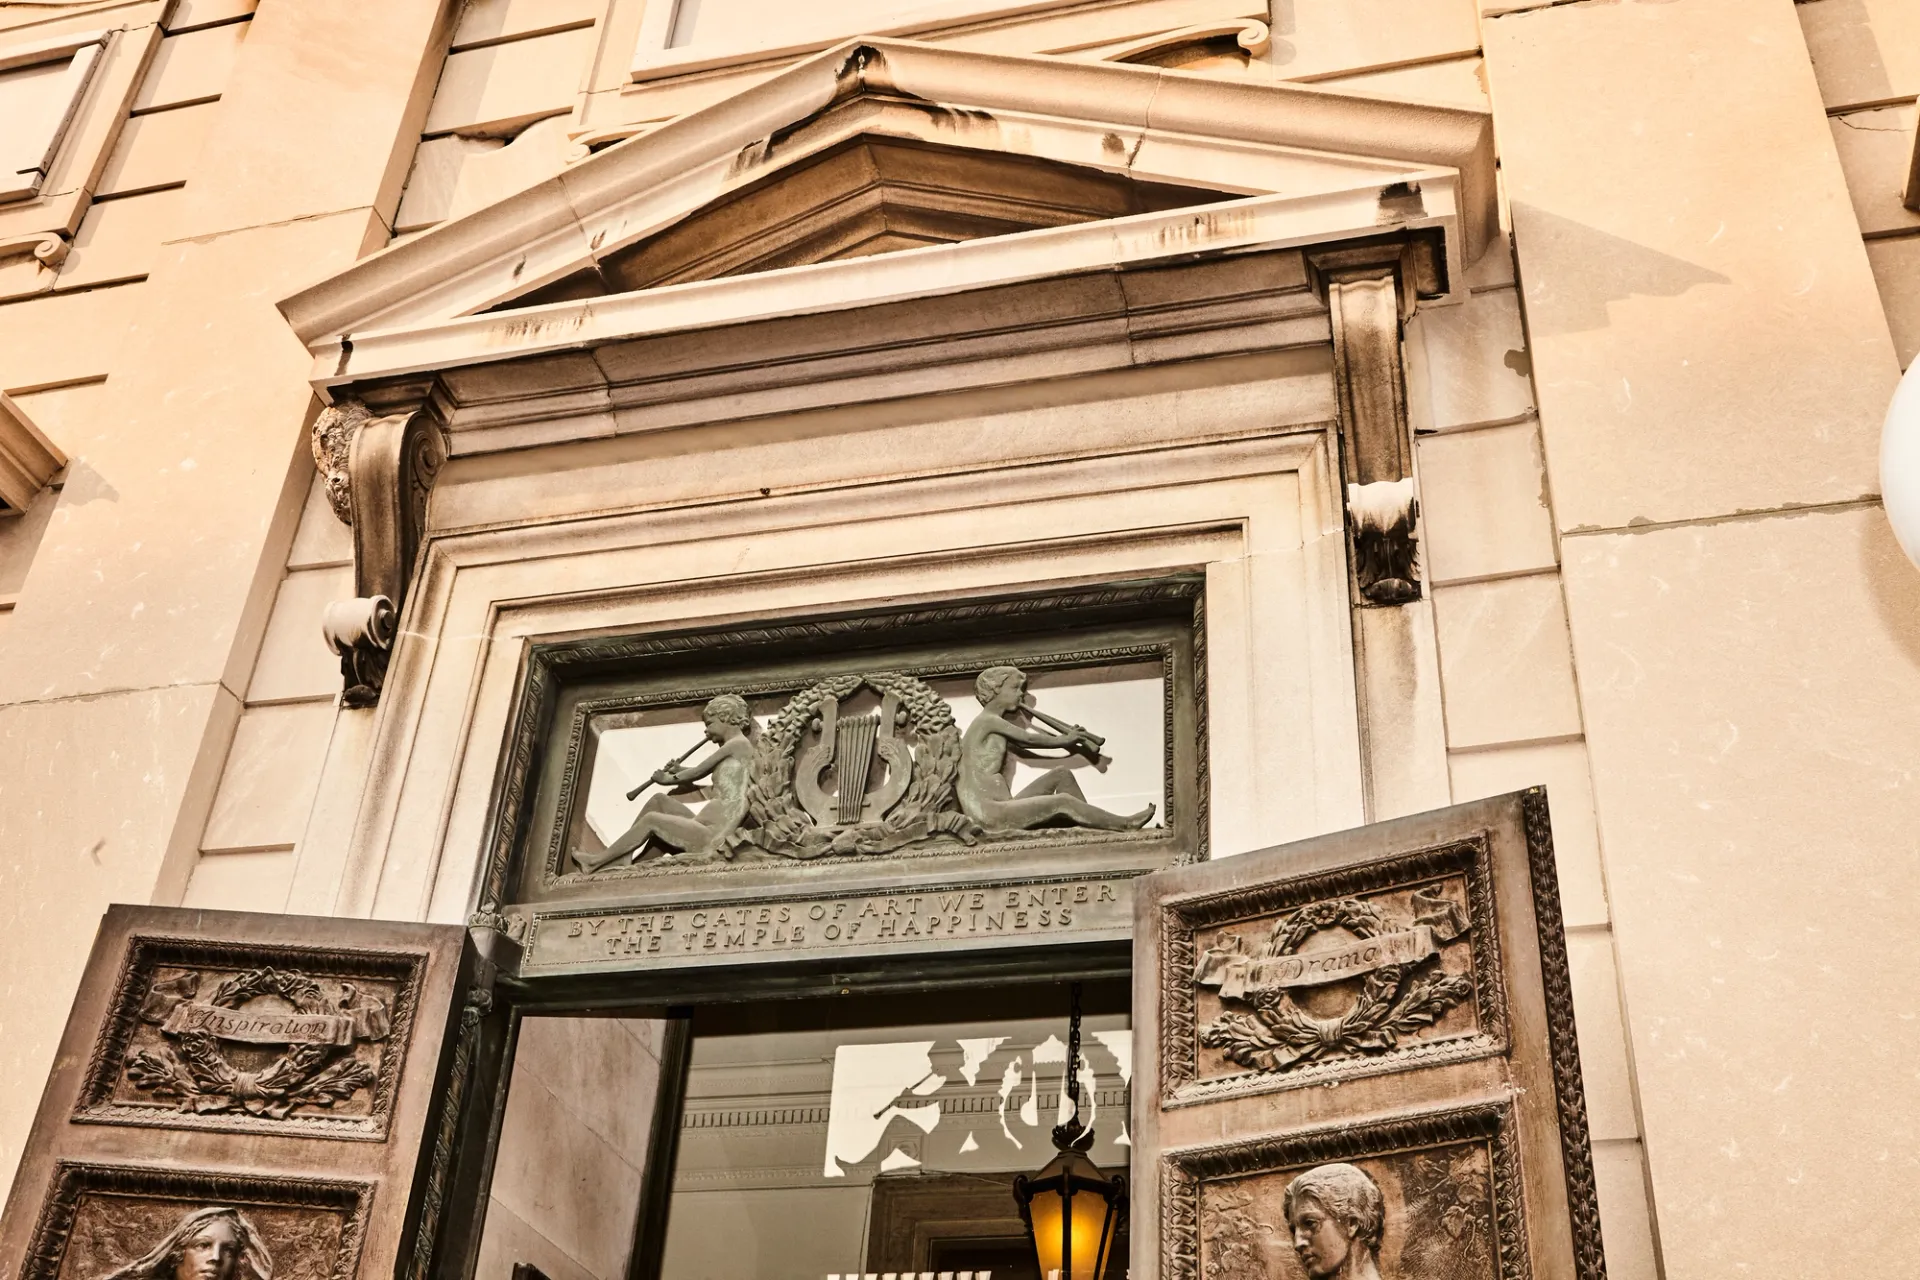 Bronze doors to the American Academy of Arts and Letters with the inscription, "By the gates of art we enter the temple of happiness."